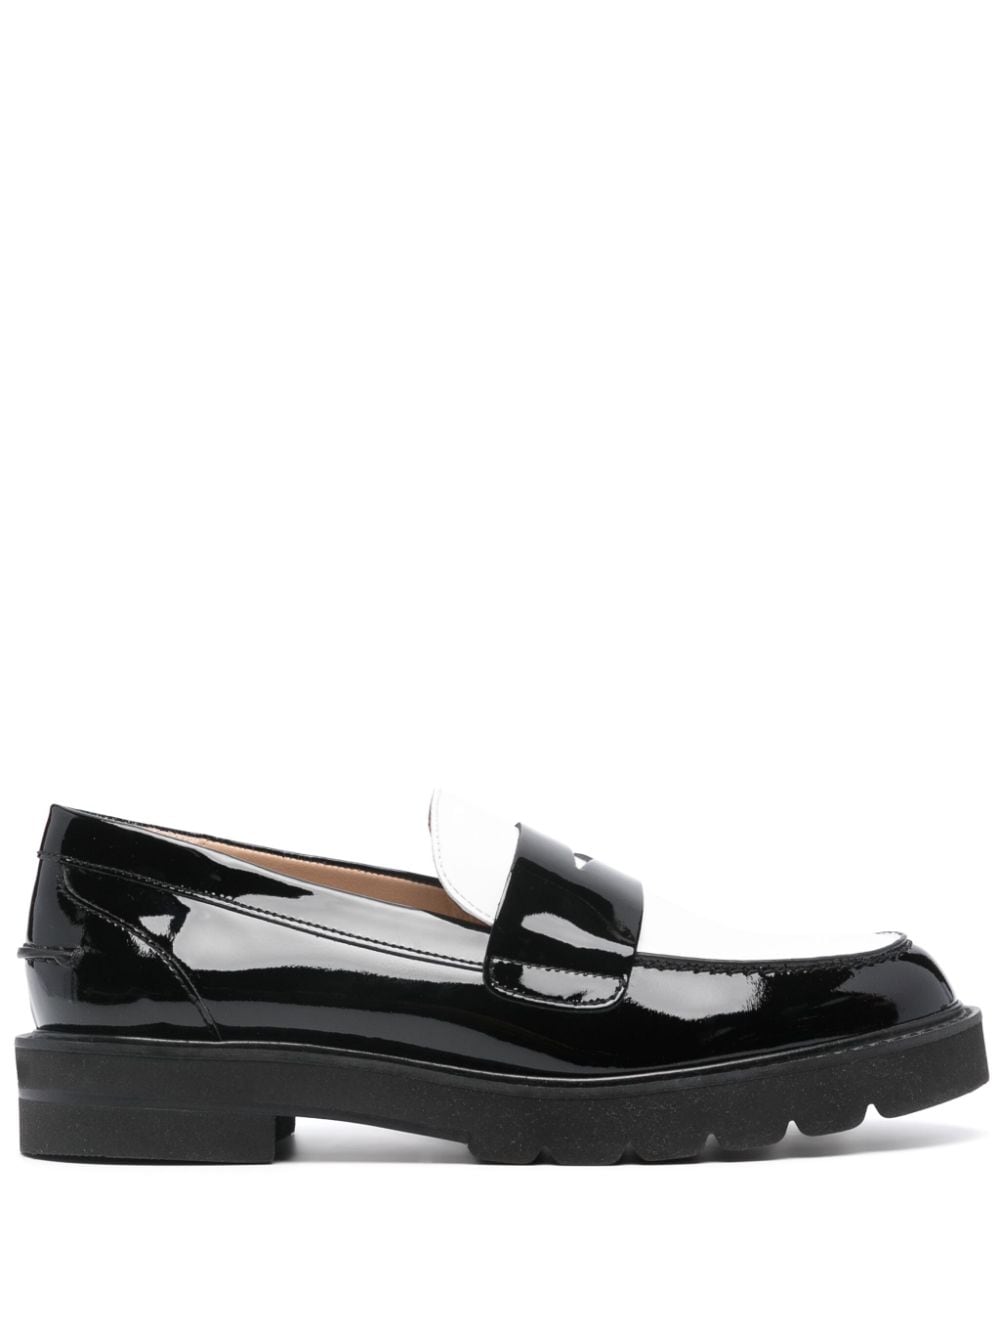 Image 1 of Stuart Weitzman Palmer leather loafers